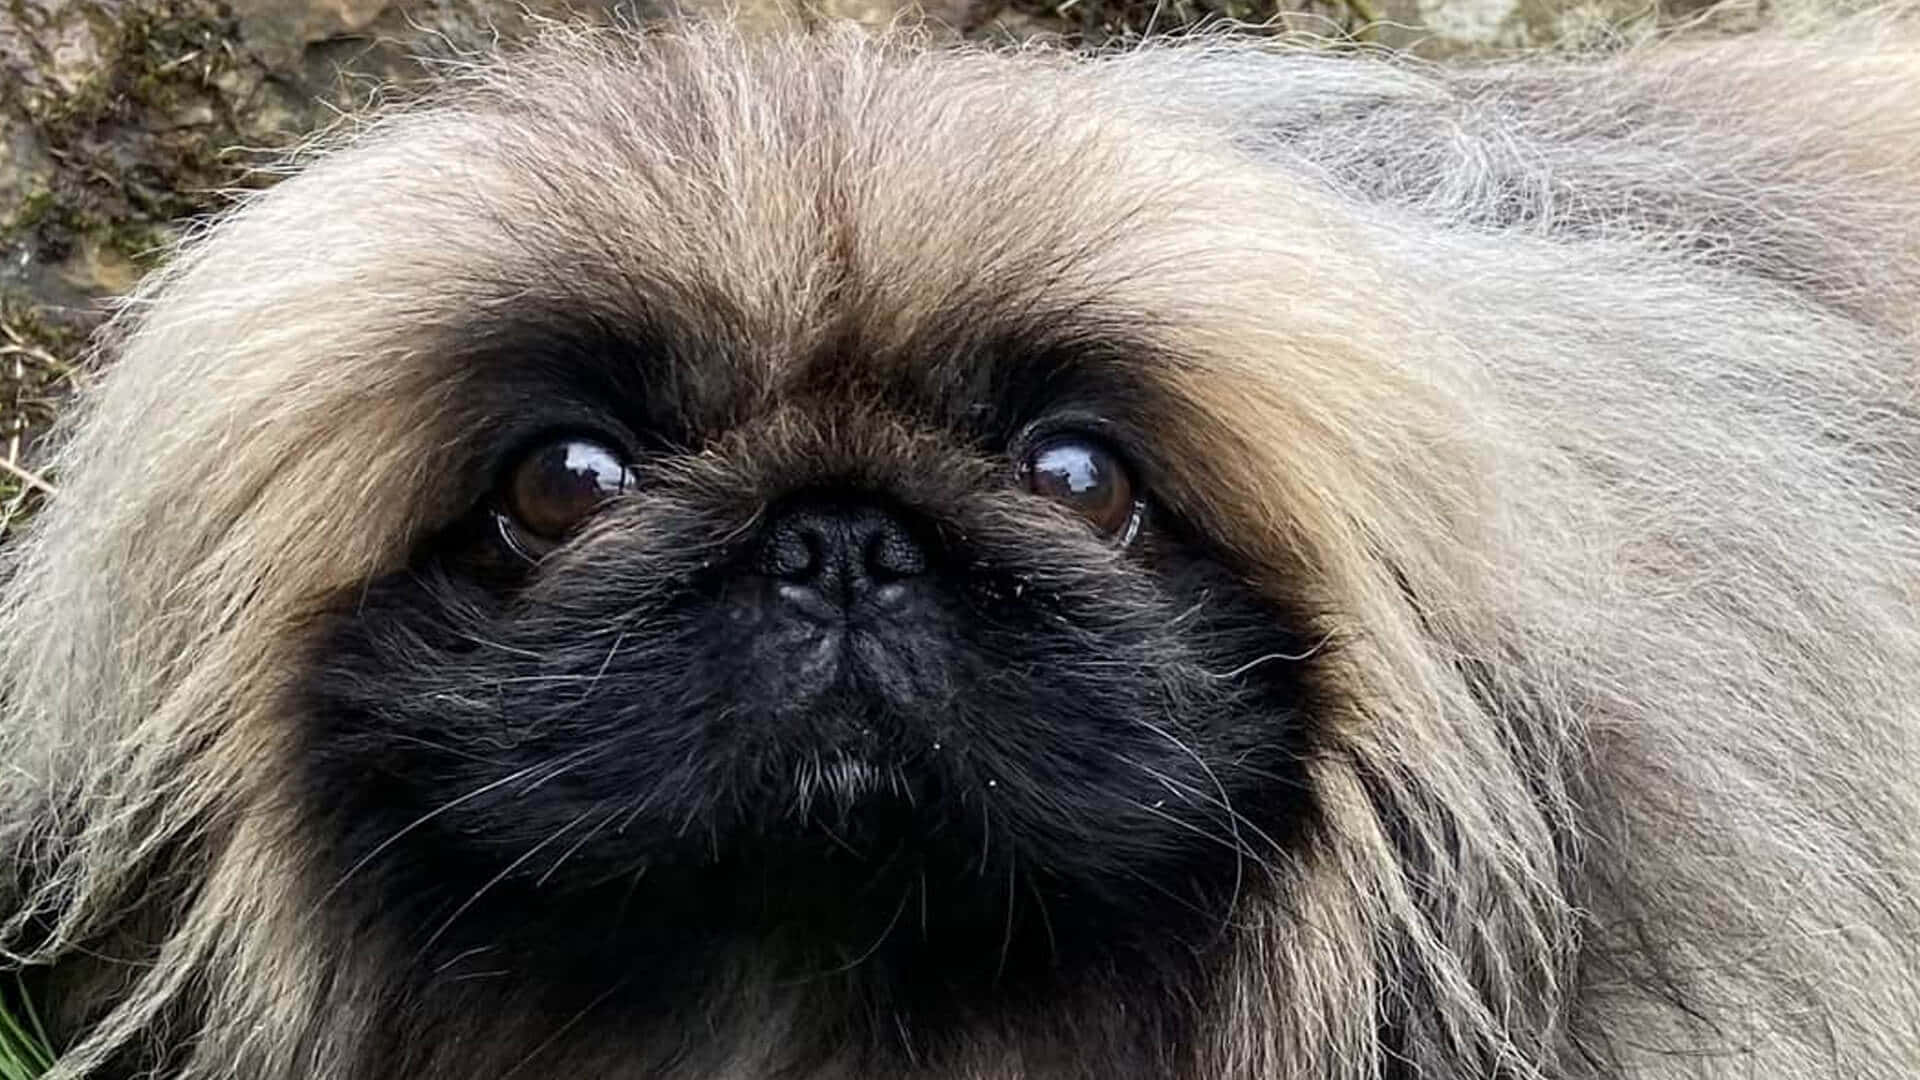 A cute and fluffy Pekingese ready for a cuddle